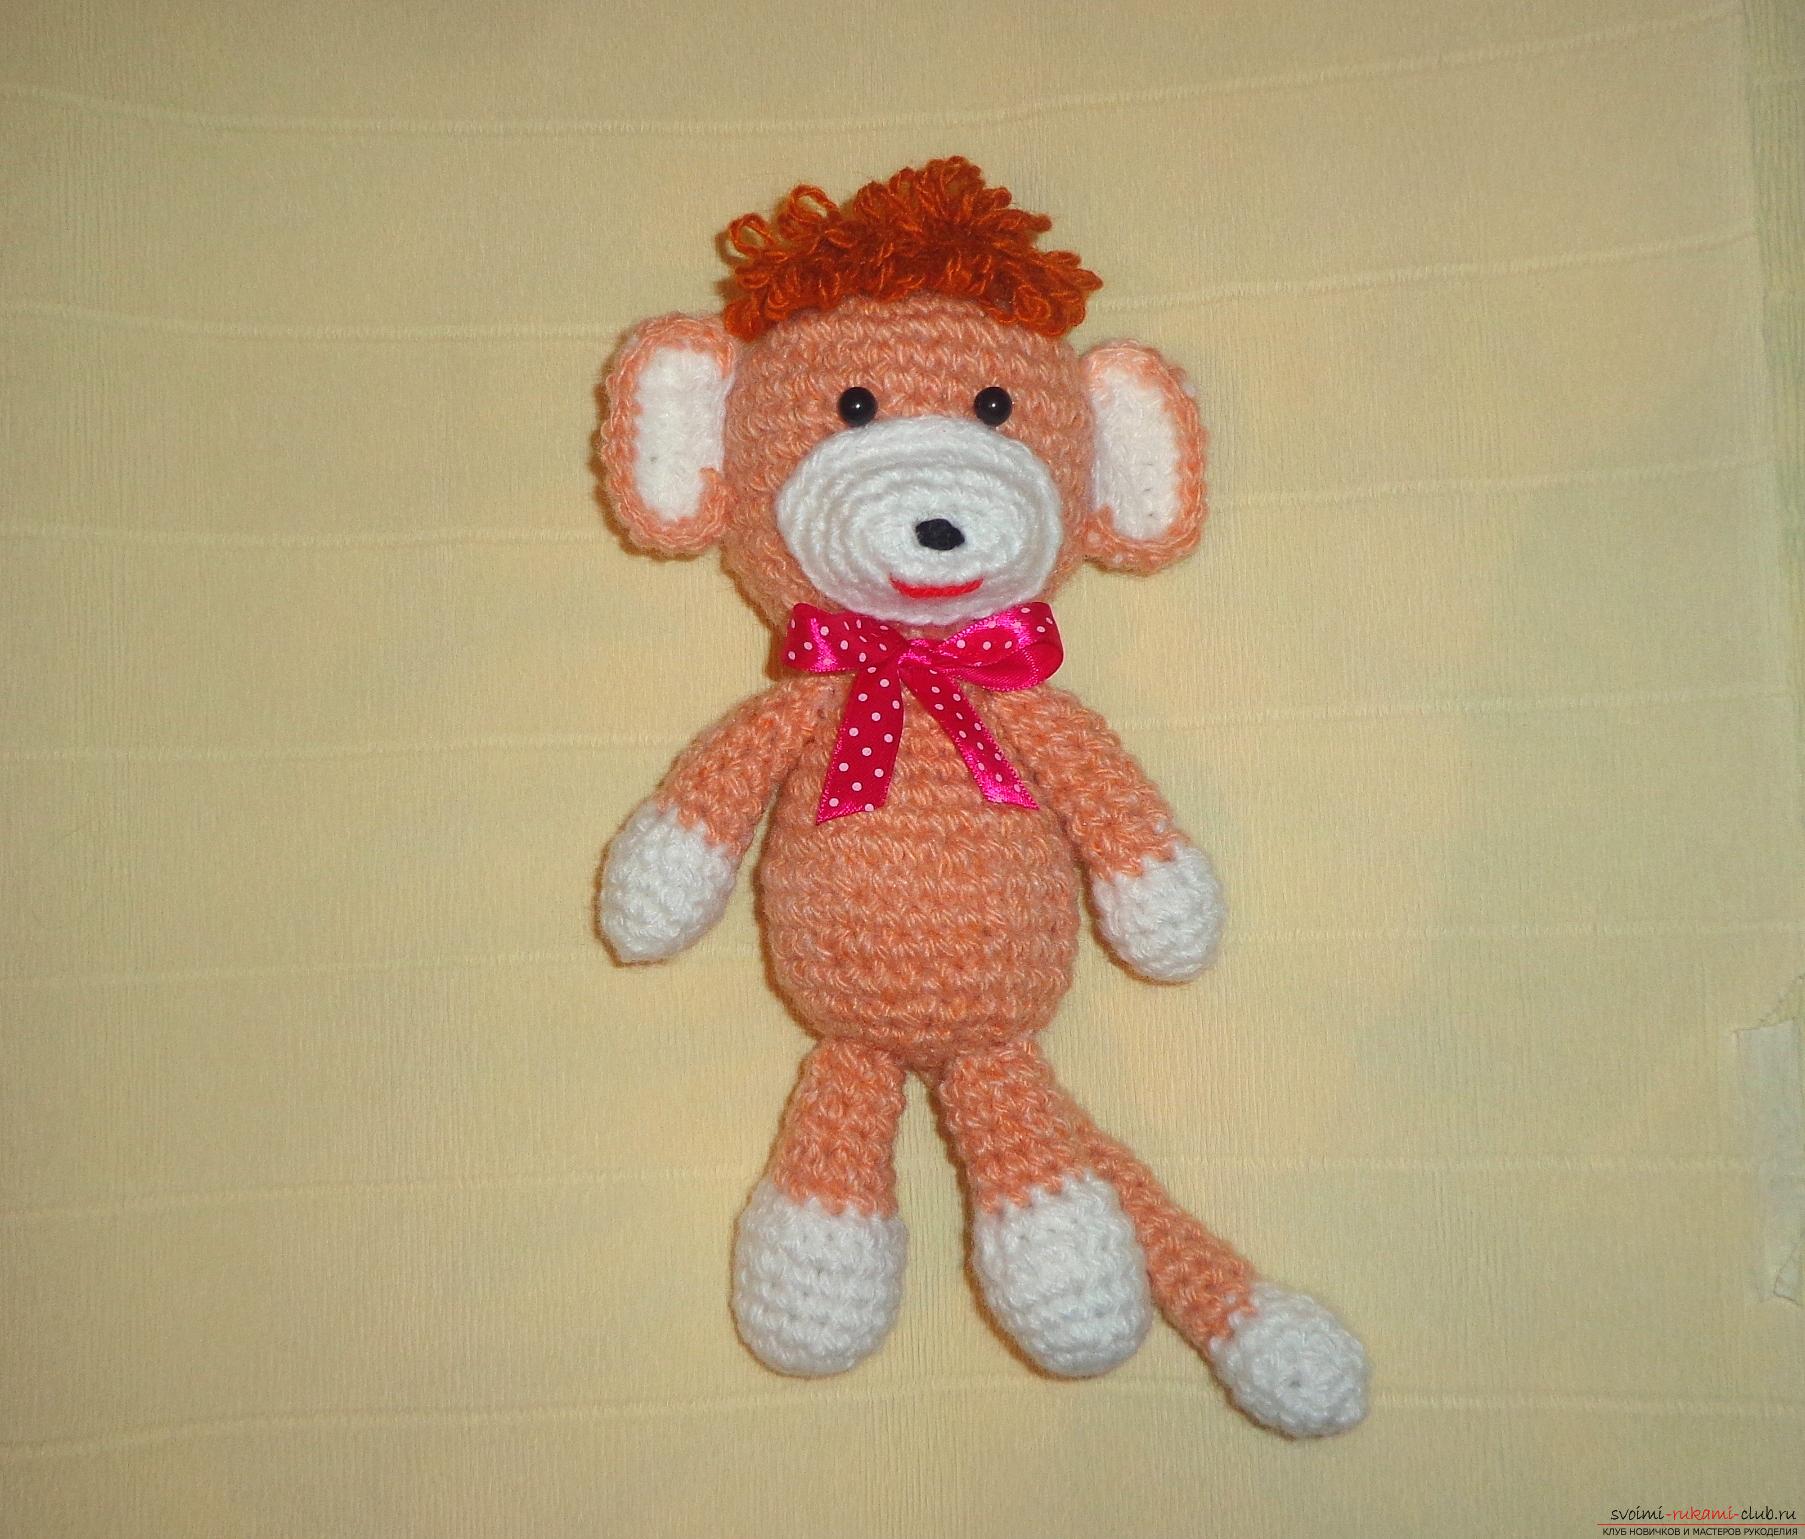 A detailed master-class of crochet crochet New Year's crafts in 2016 - monkey. Photo number 15